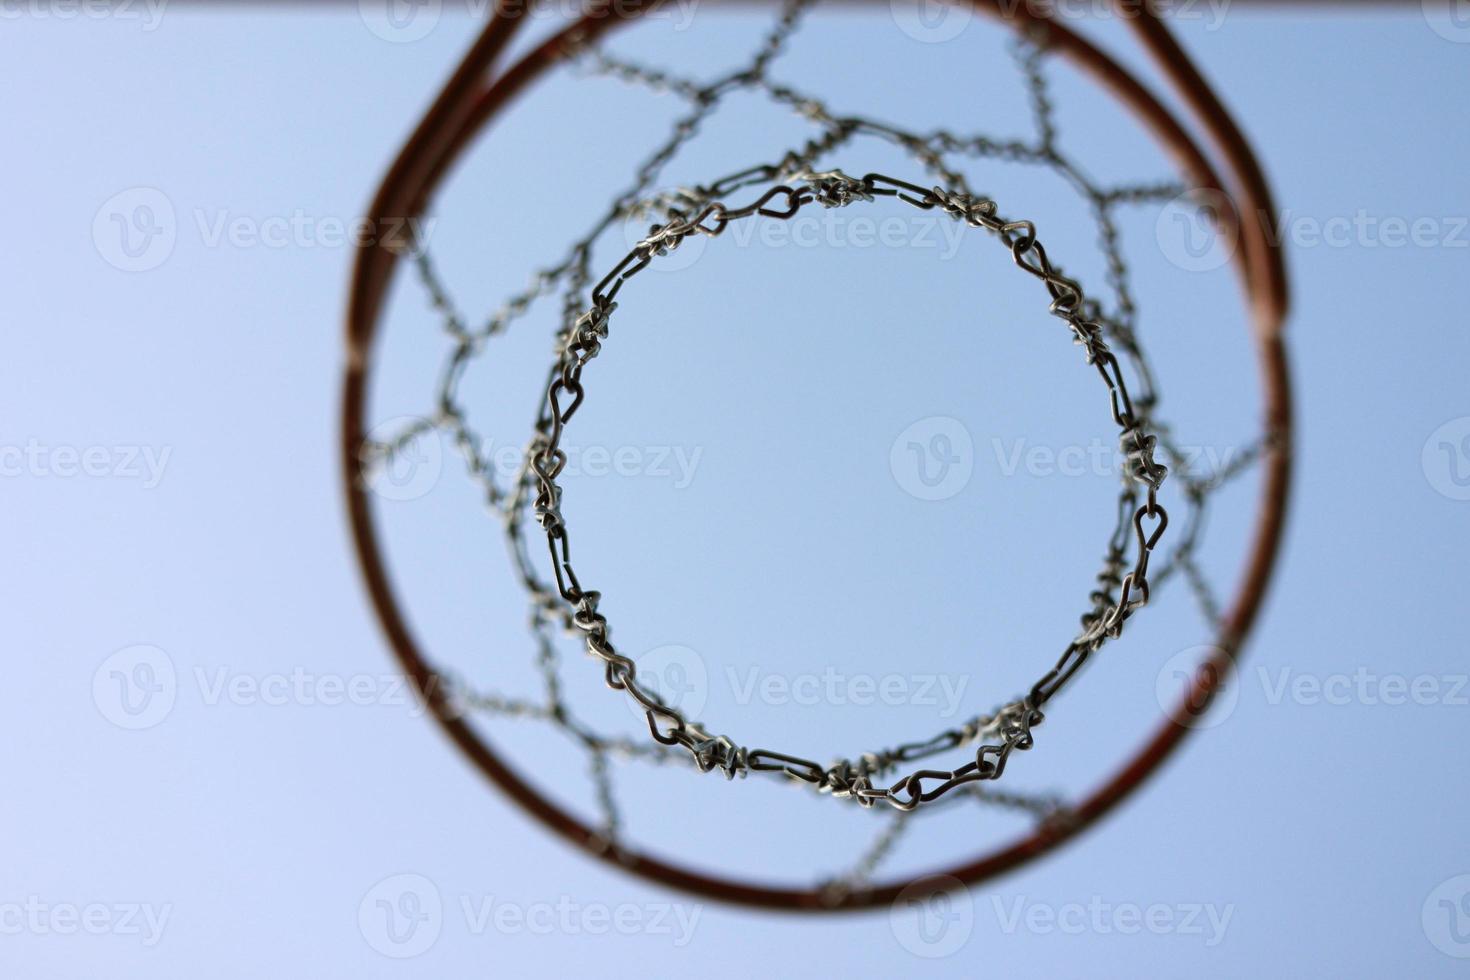 basketball hoop with metal net and wooden backboard on blue sky background. Basketball court outdoors. Recreational sport equipment on streetball field alfresco, playground on street. bottom view photo